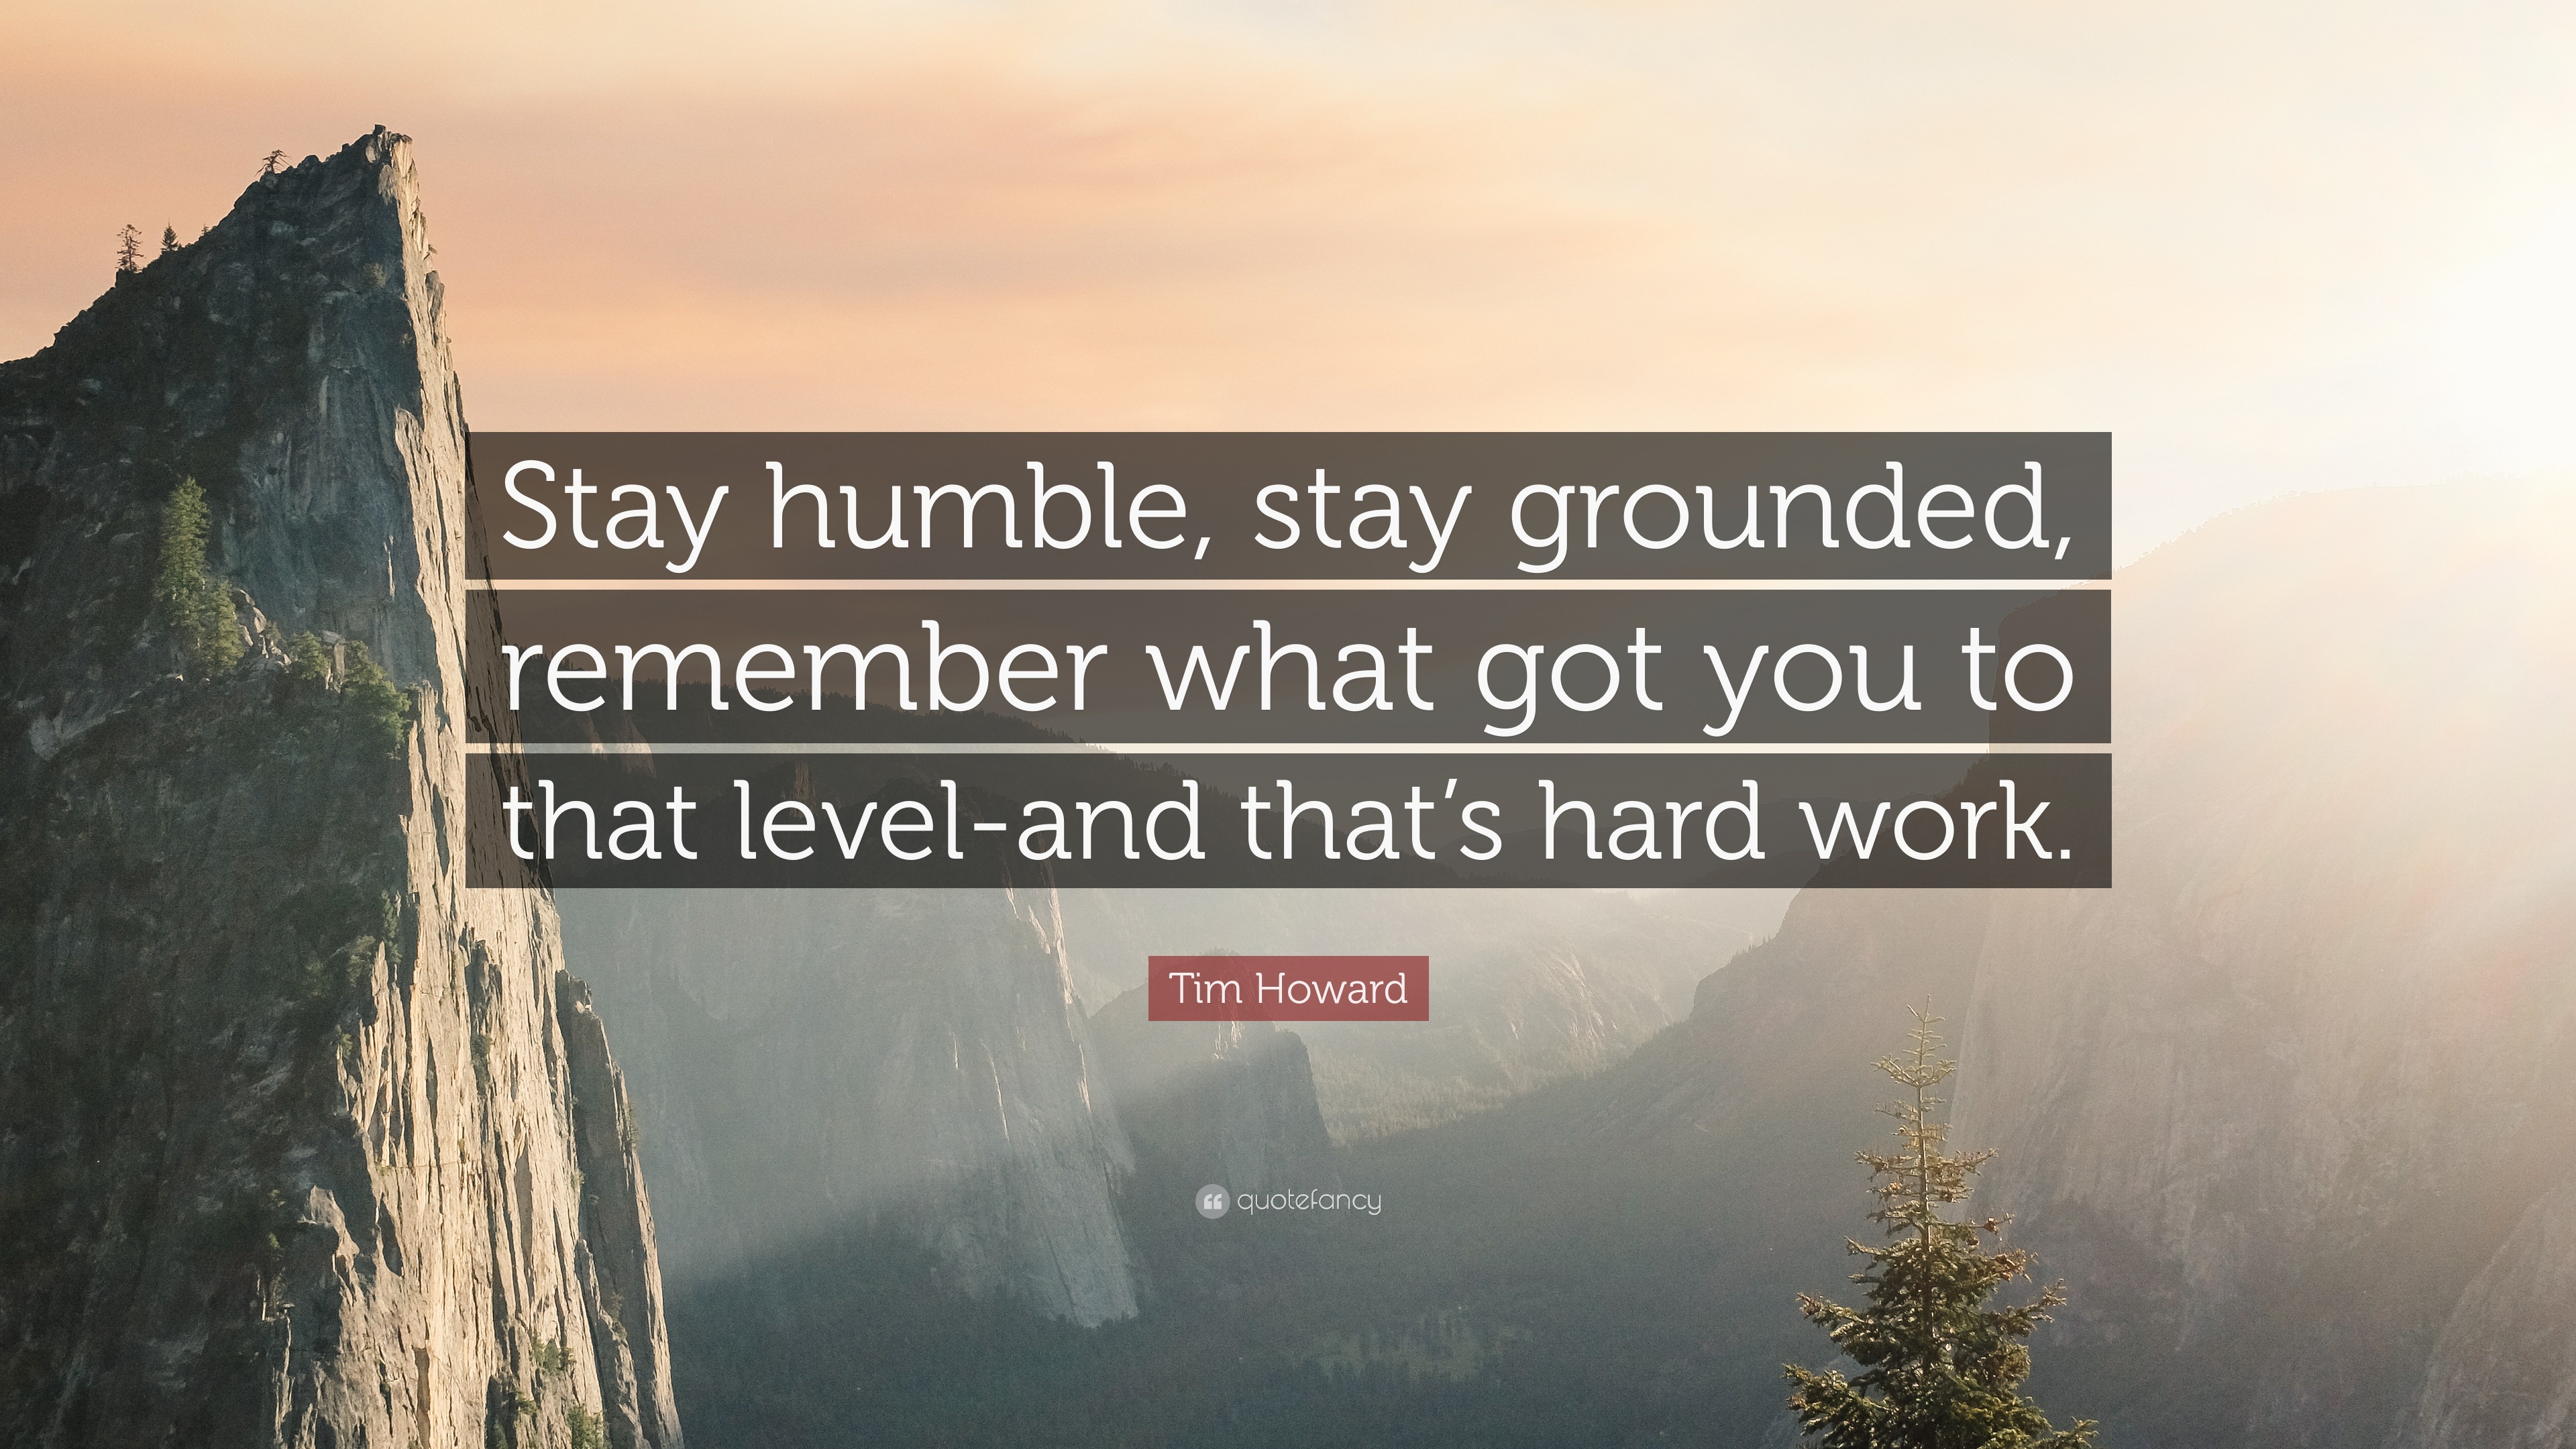 Tim Howard Quote: “Stay humble, stay grounded, remember what got you to